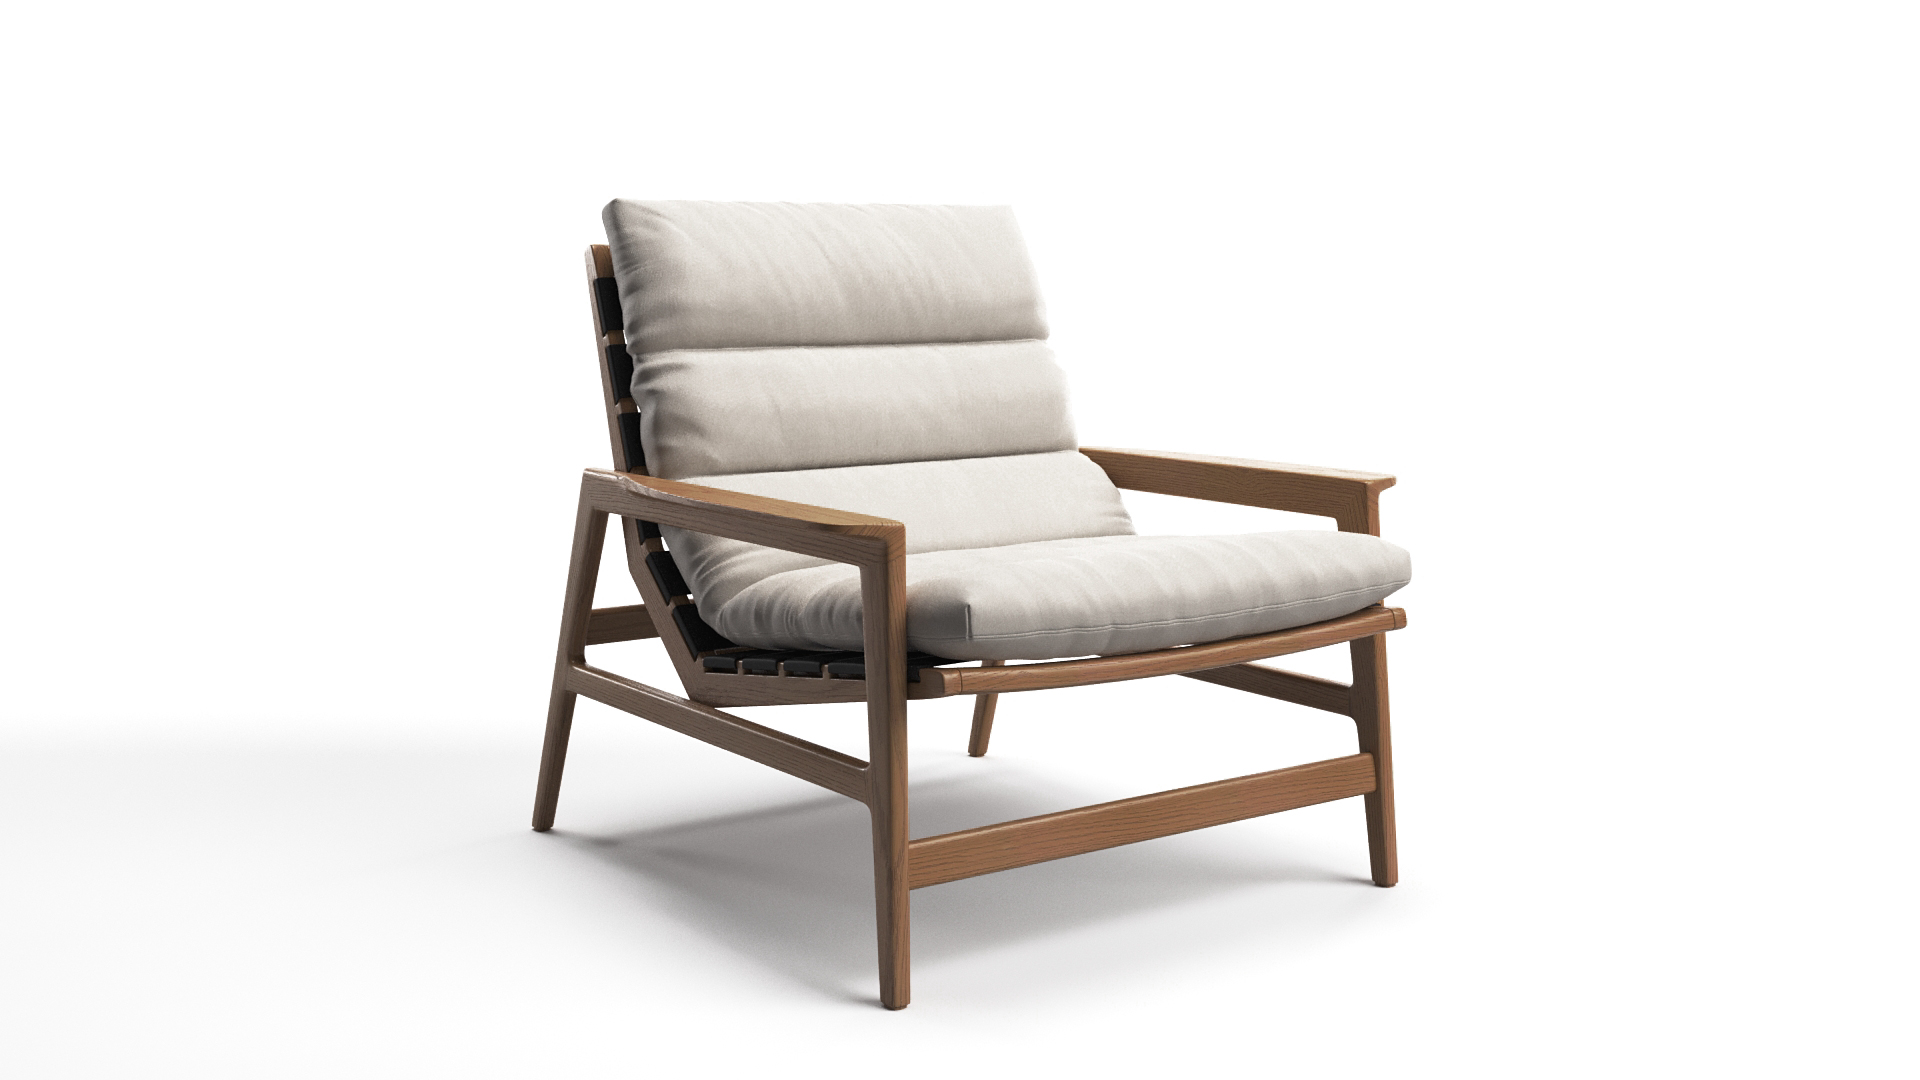 Photorealistic Rendering of Chair 3D Model with Textures